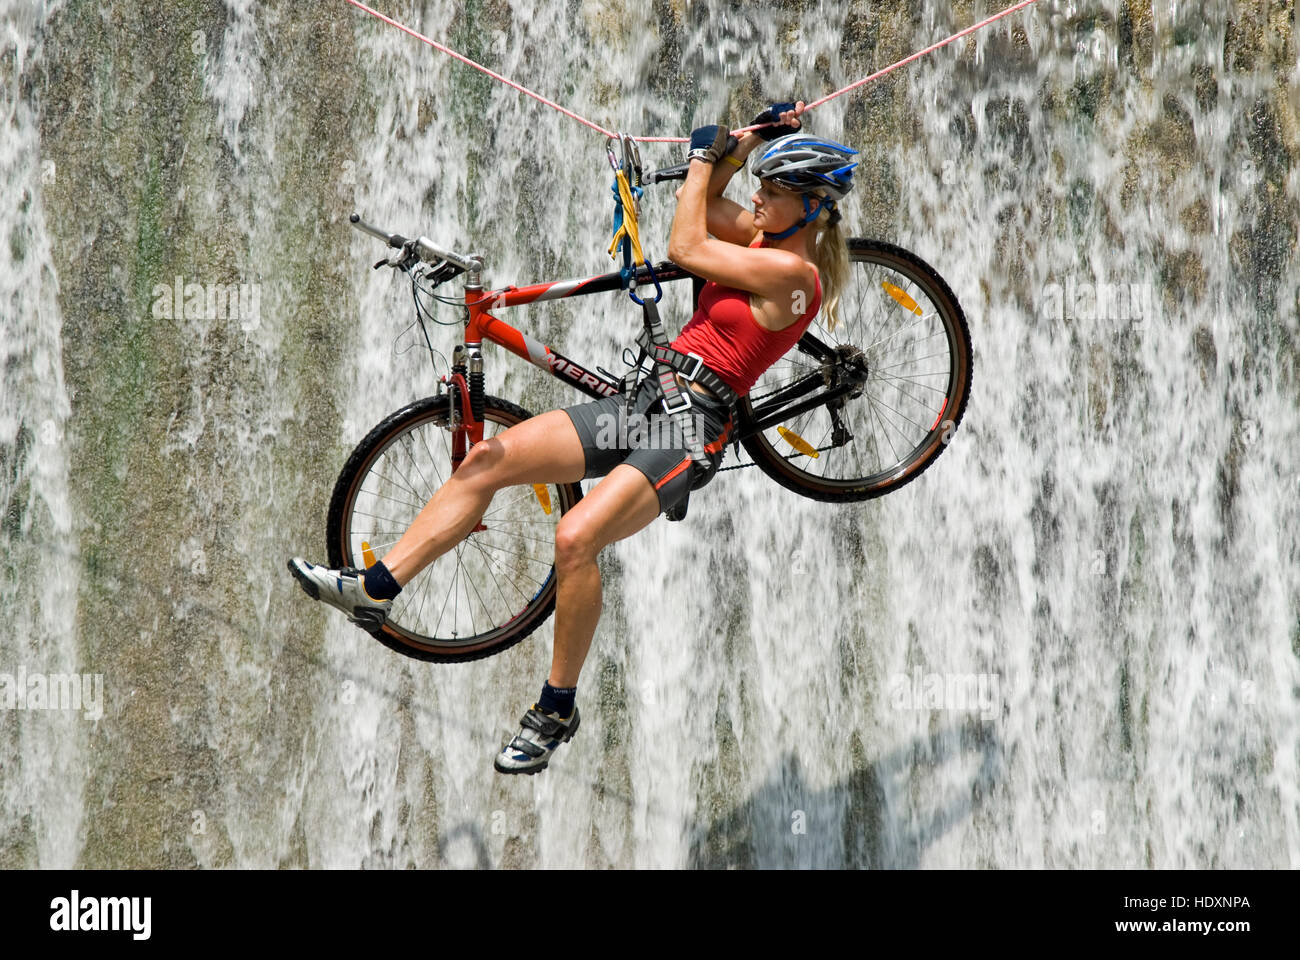 Woman crossing a waterfall on a rope with a bike, Kalkalpen National Park, Upper Austria, Austria, Europe Stock Photo